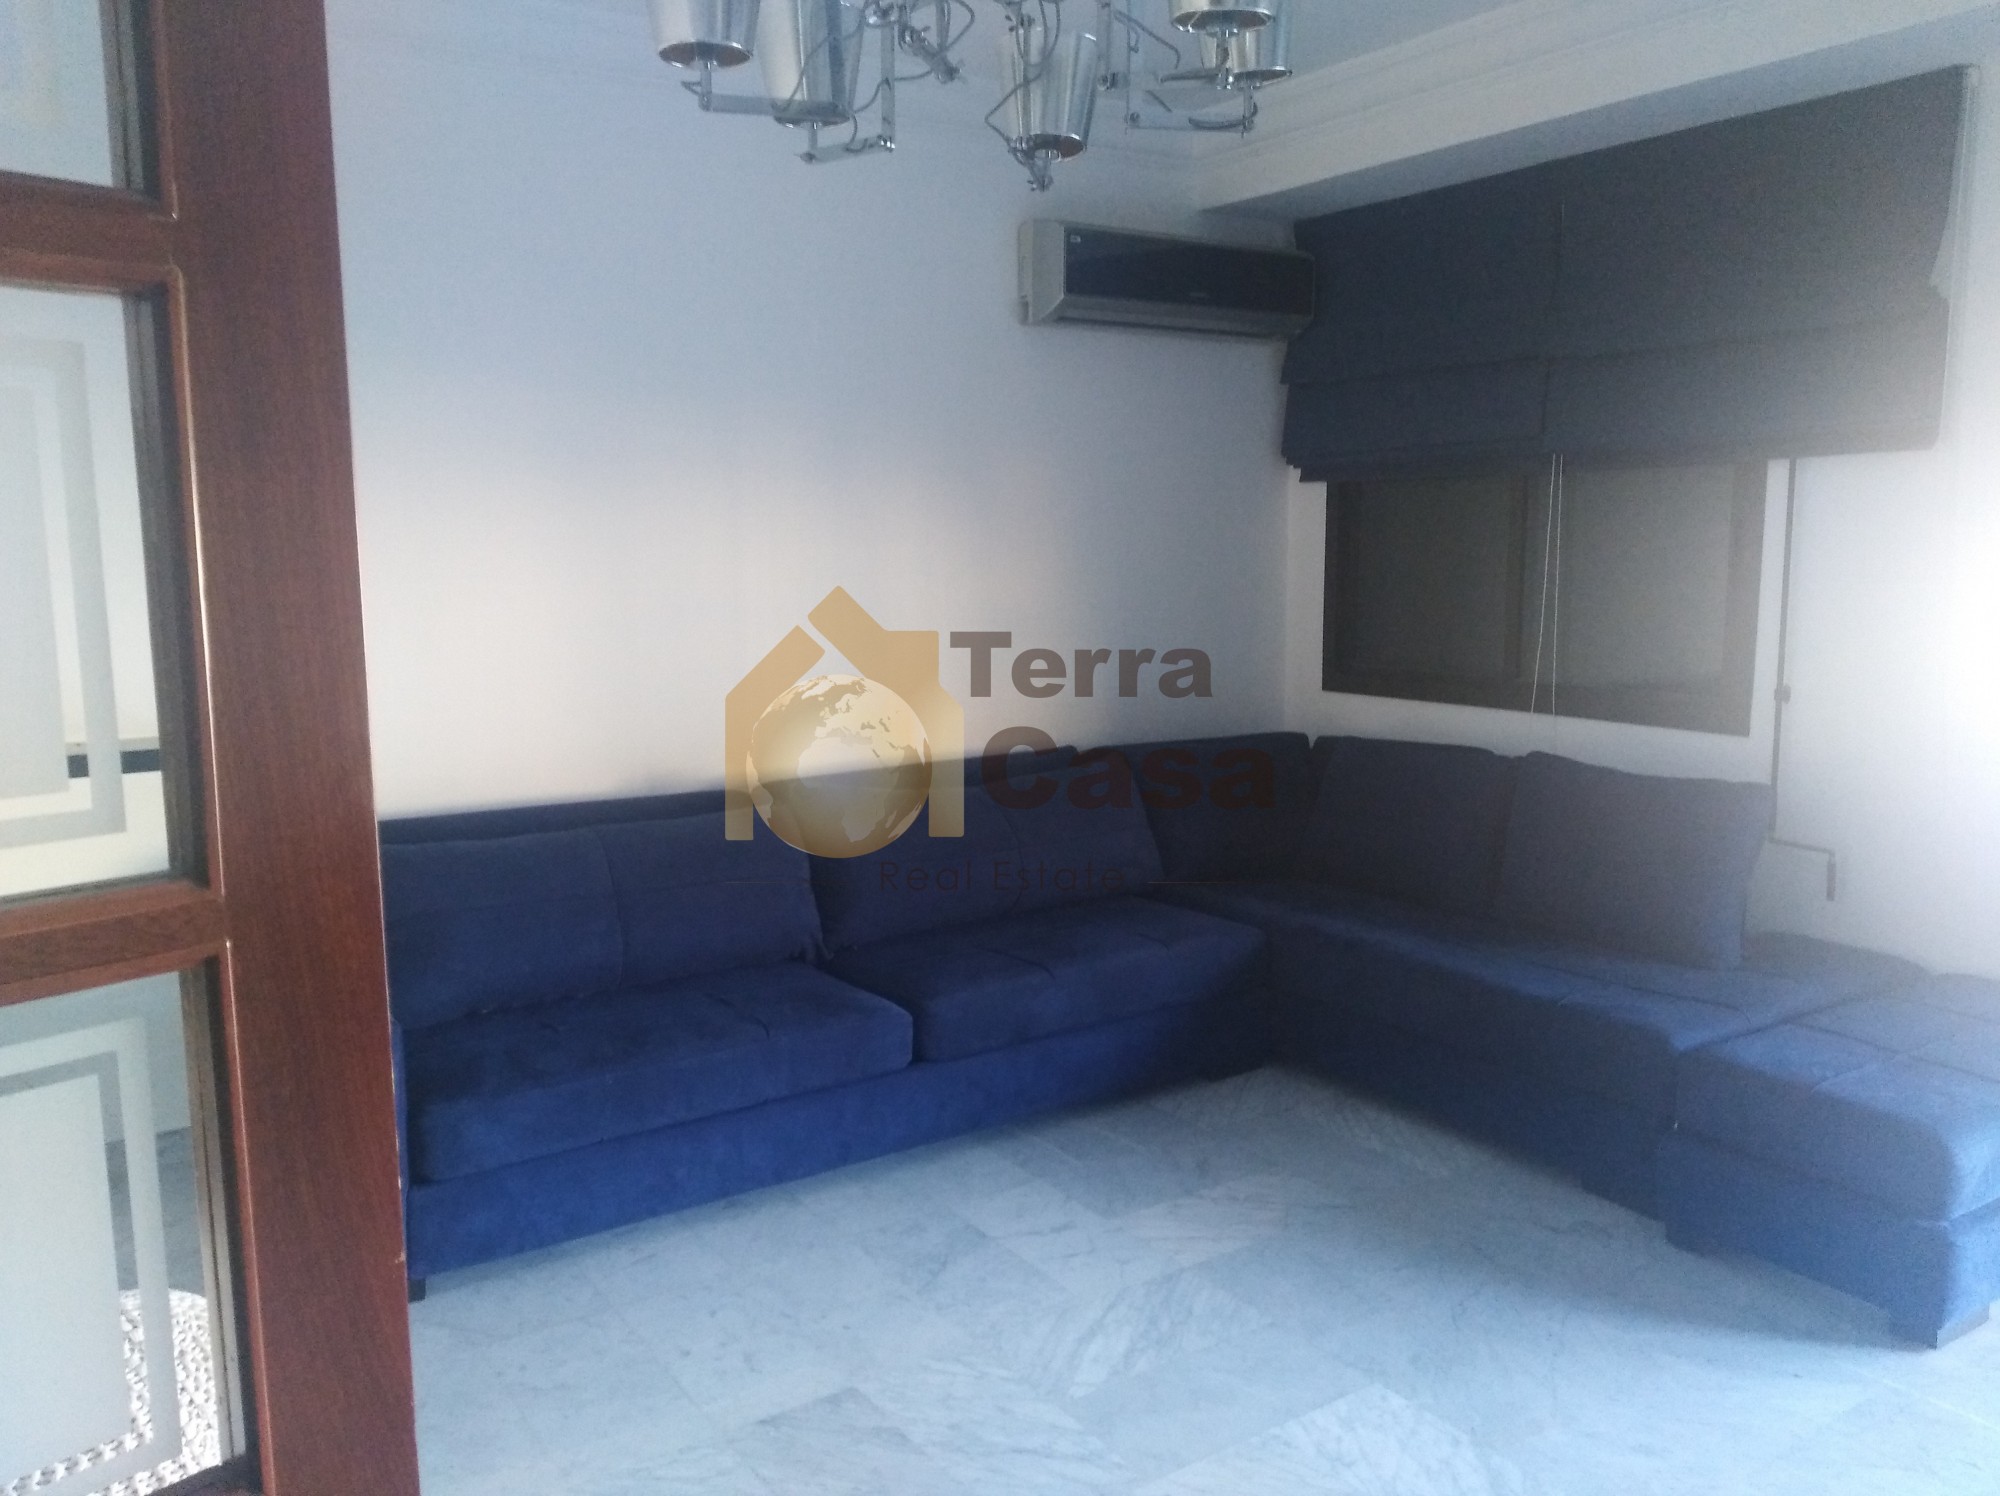 Apartment for rent in mezher fully furnished with open view.